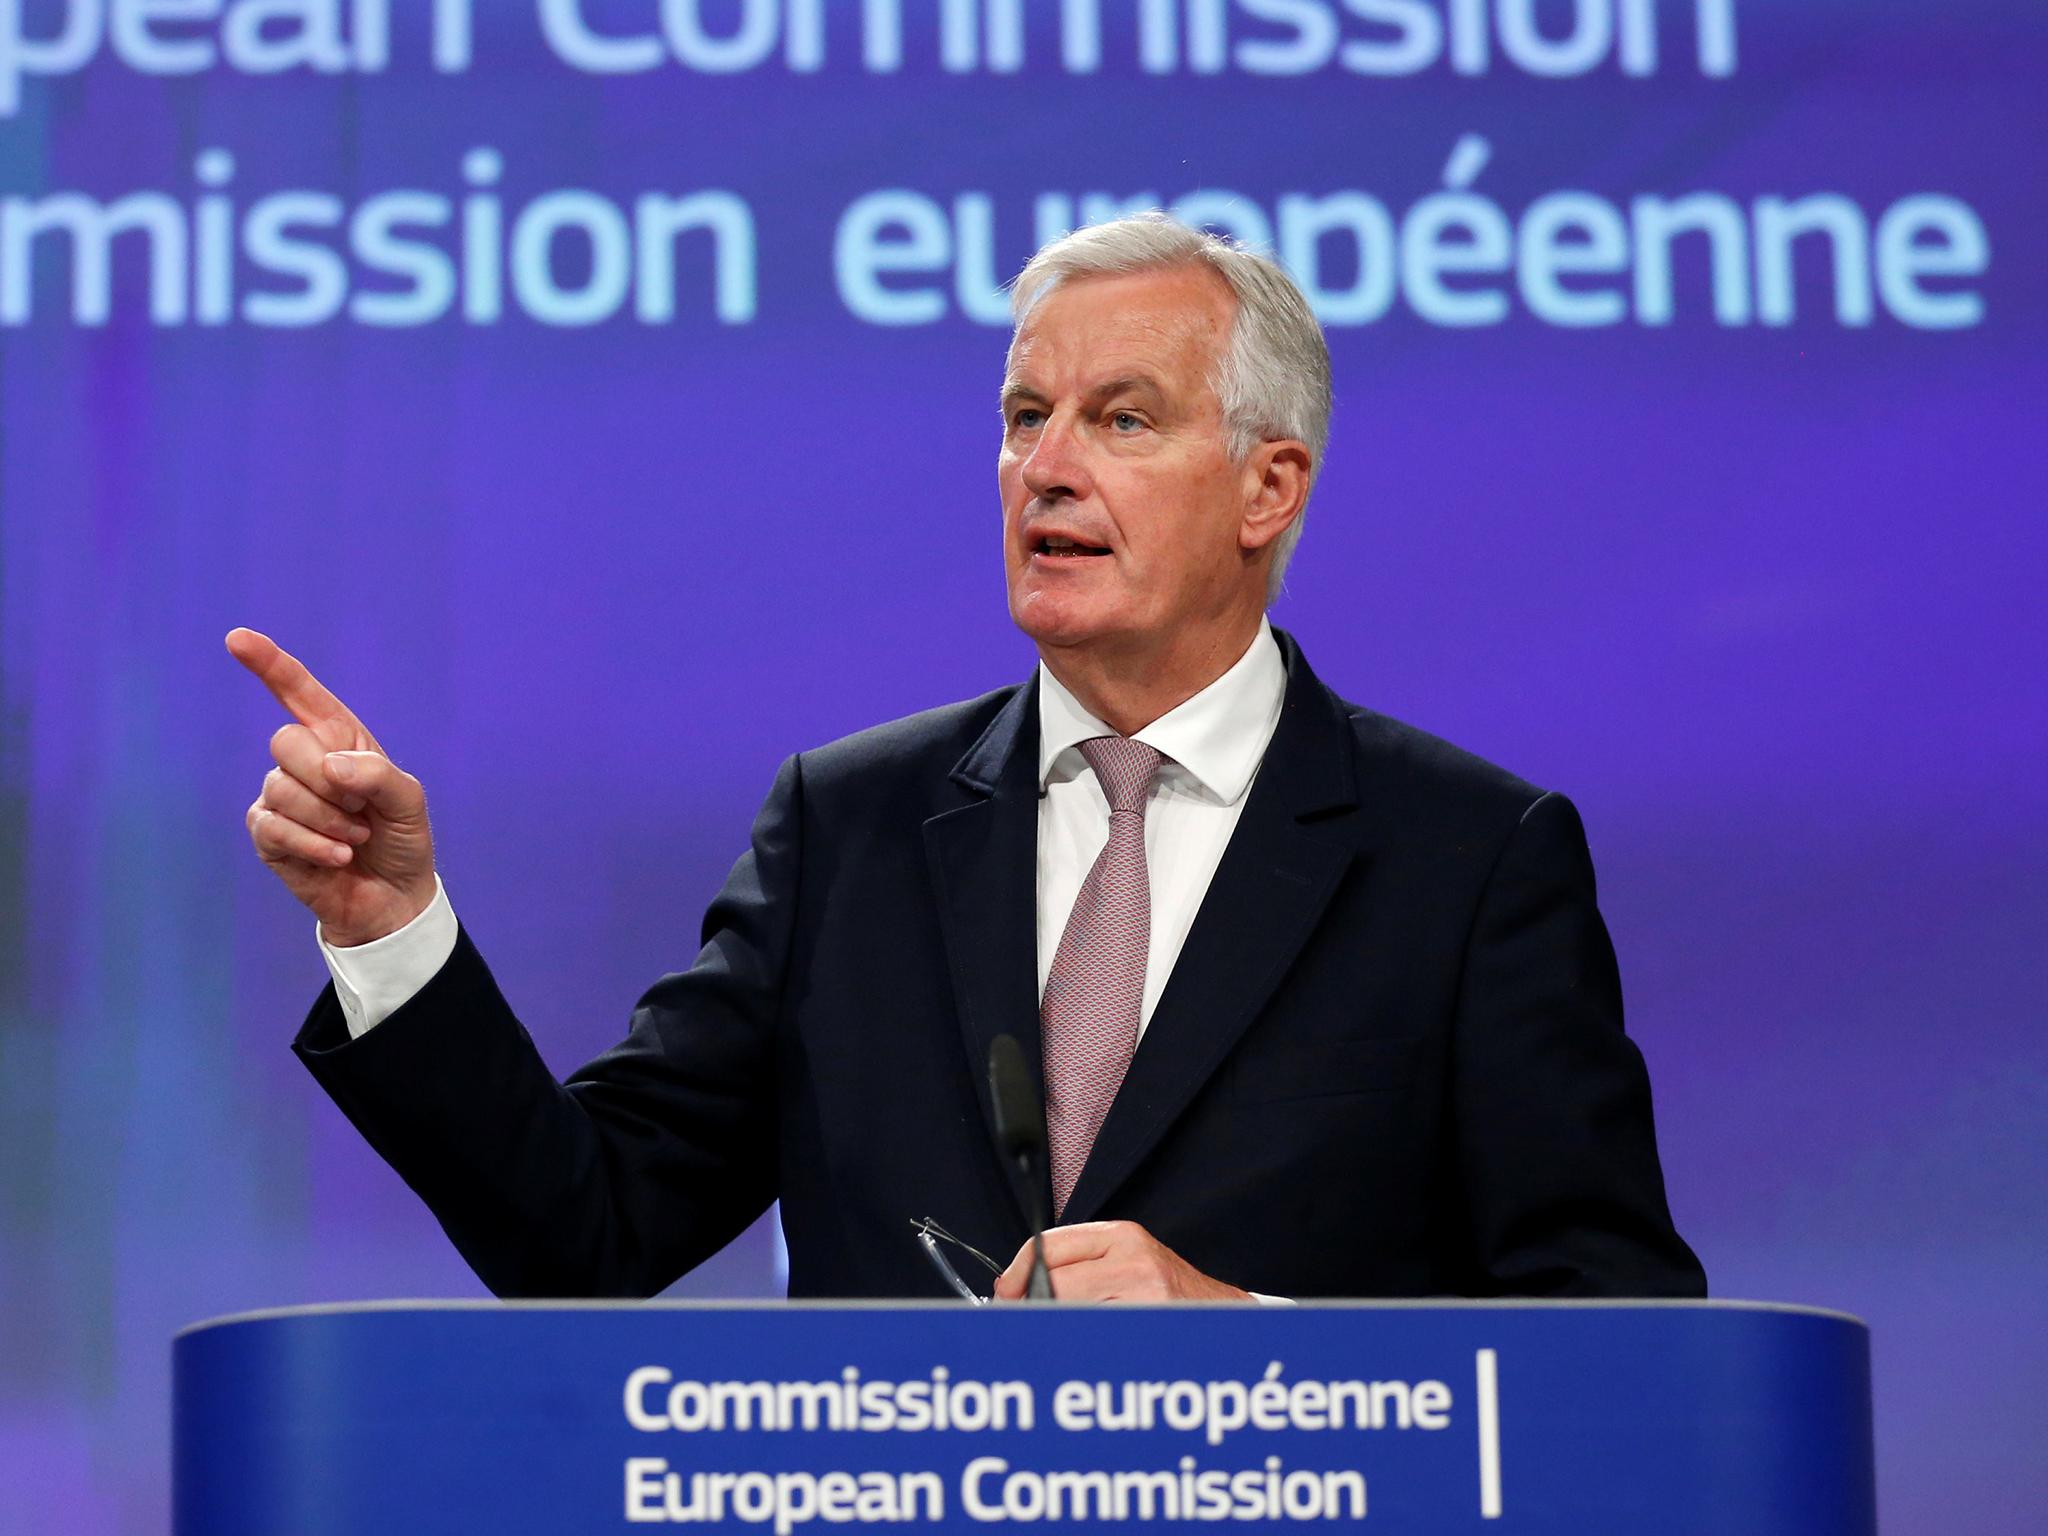 Michel Barnier has made clear how hard-headed his approach will be